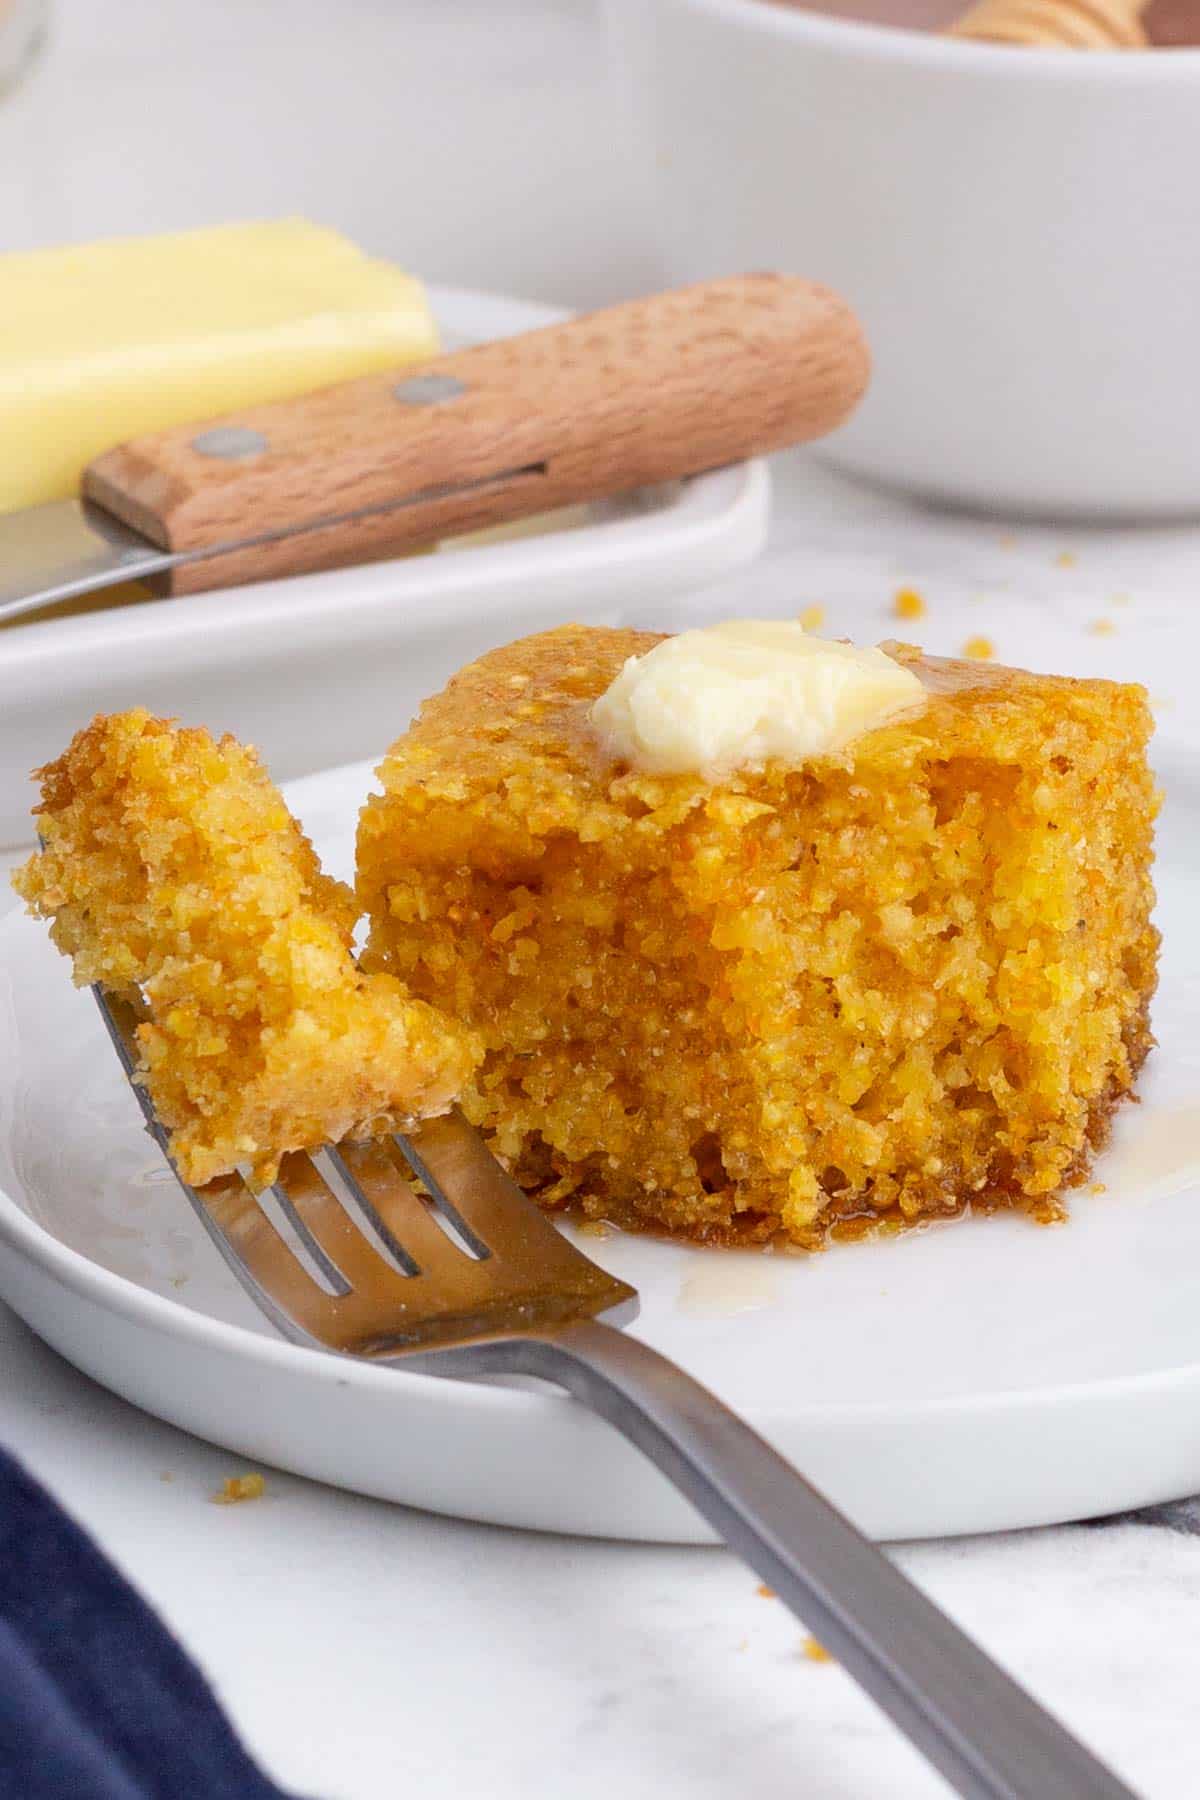 A bite of cornbread on a fork is ready to enjoy.